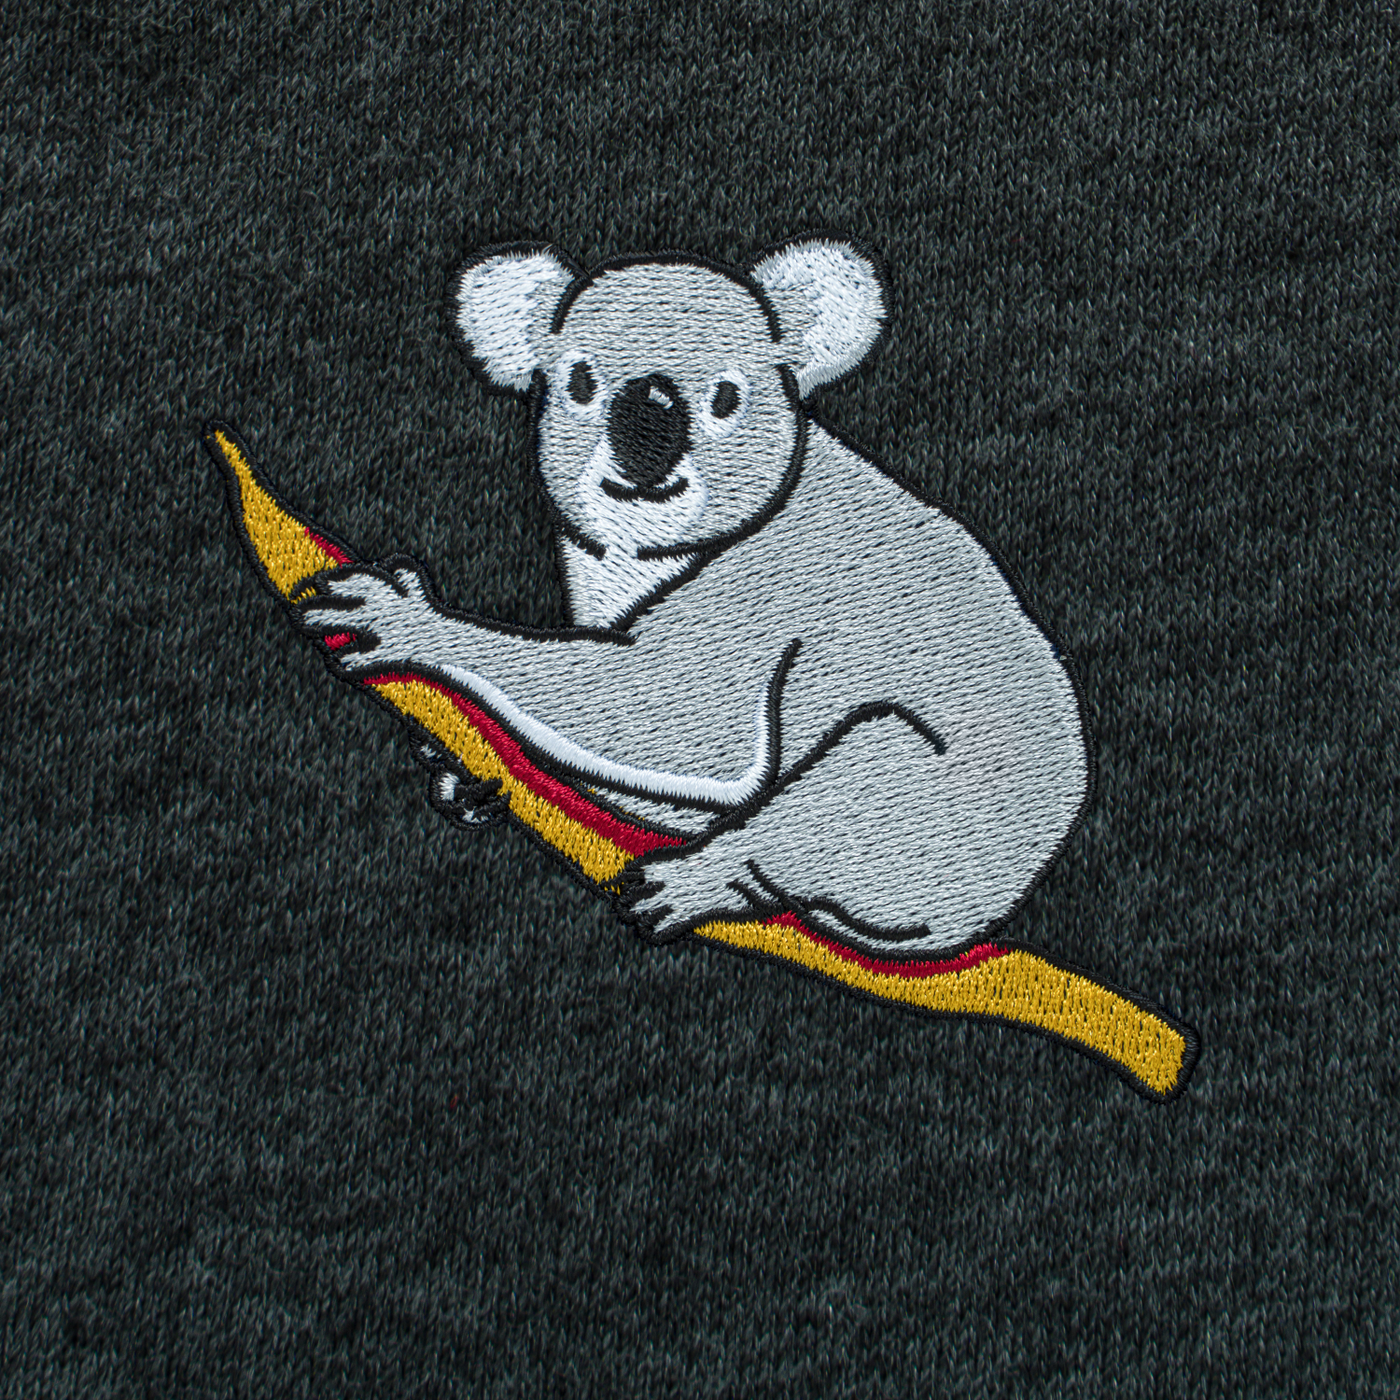 Bobby's Planet Men's Embroidered Koala T-Shirt from Australia Down Under Animals Collection in Dark Grey Heather Color#color_dark-grey-heather